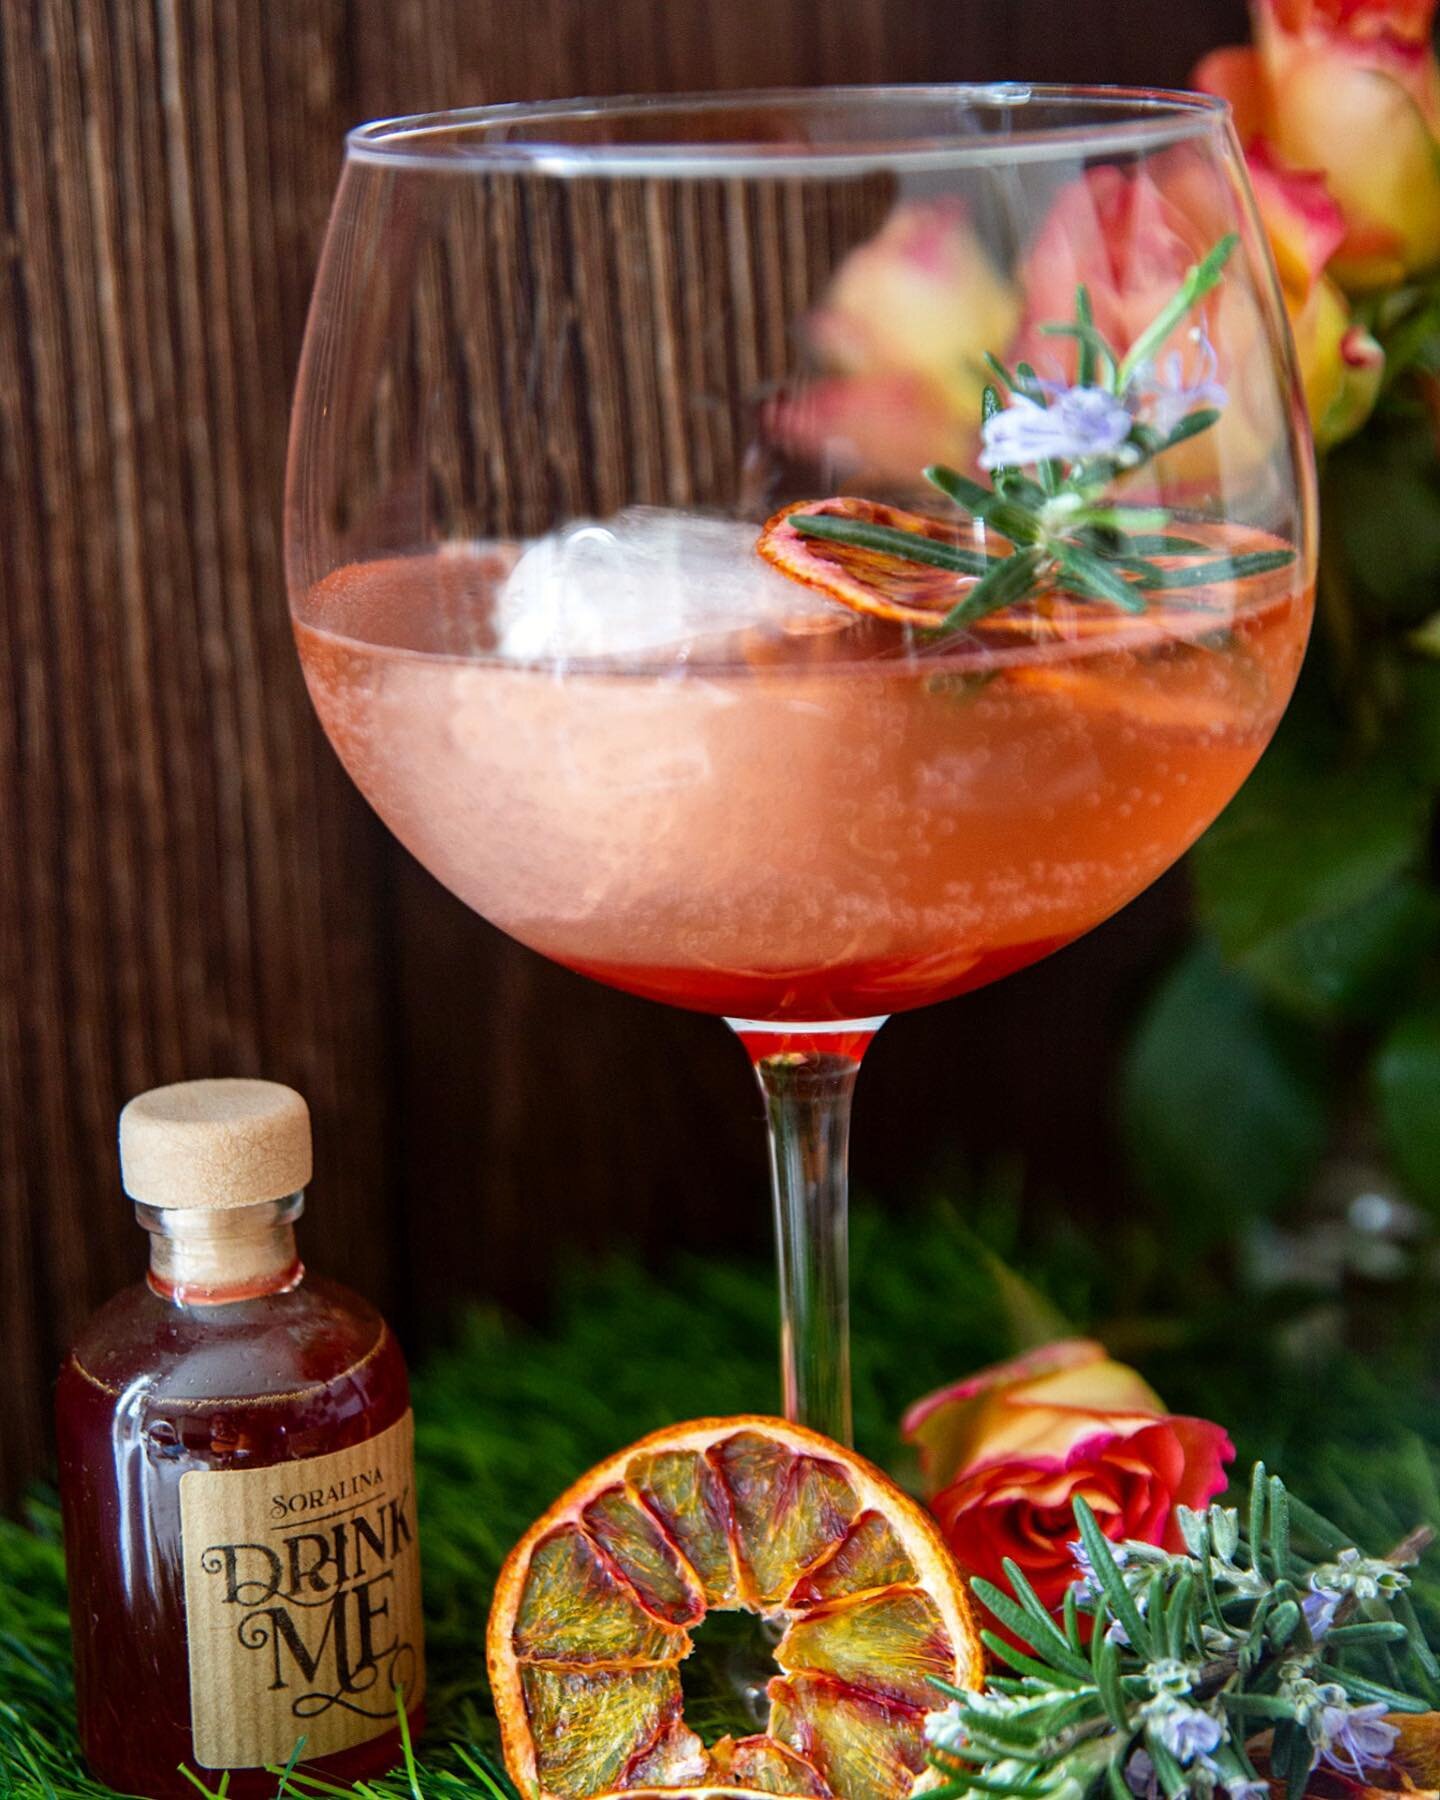 A forever-favourite: Blood Orange and Rosemary G&amp;T! Link in bio to order your home cocktail kit ⬆️ 

.
.
.
.
.
#gincocktails #cocktailkit #ukgifts #cocktailtime #drinkporn #ginandtonic